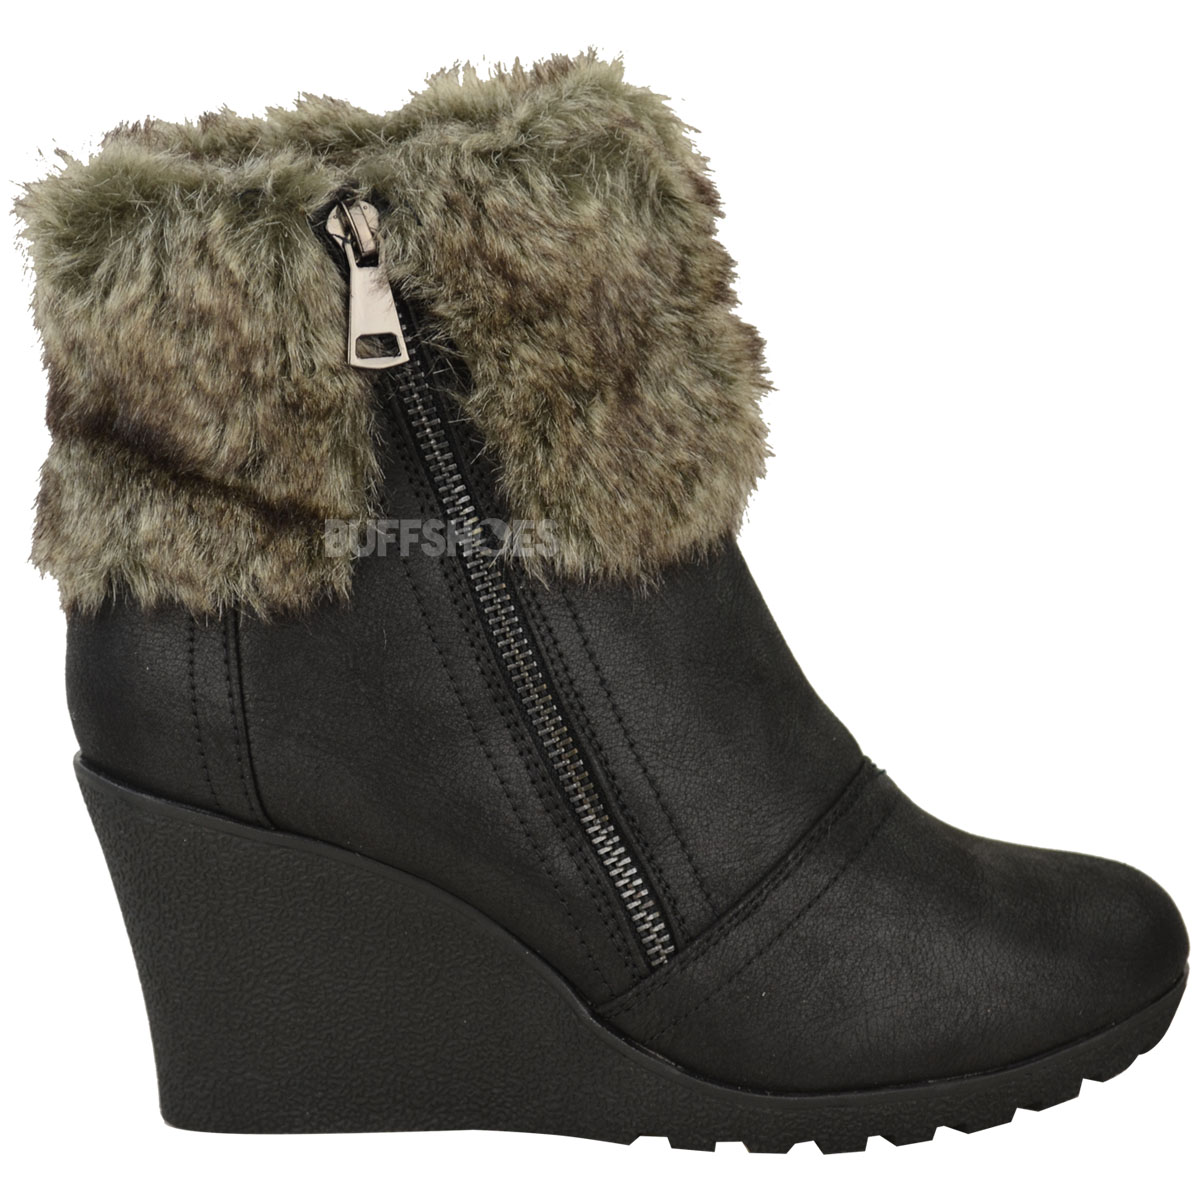 Womens Ladies Winter Fur Wedge Platform Ankle Boots Zip Fluffy Lined ...